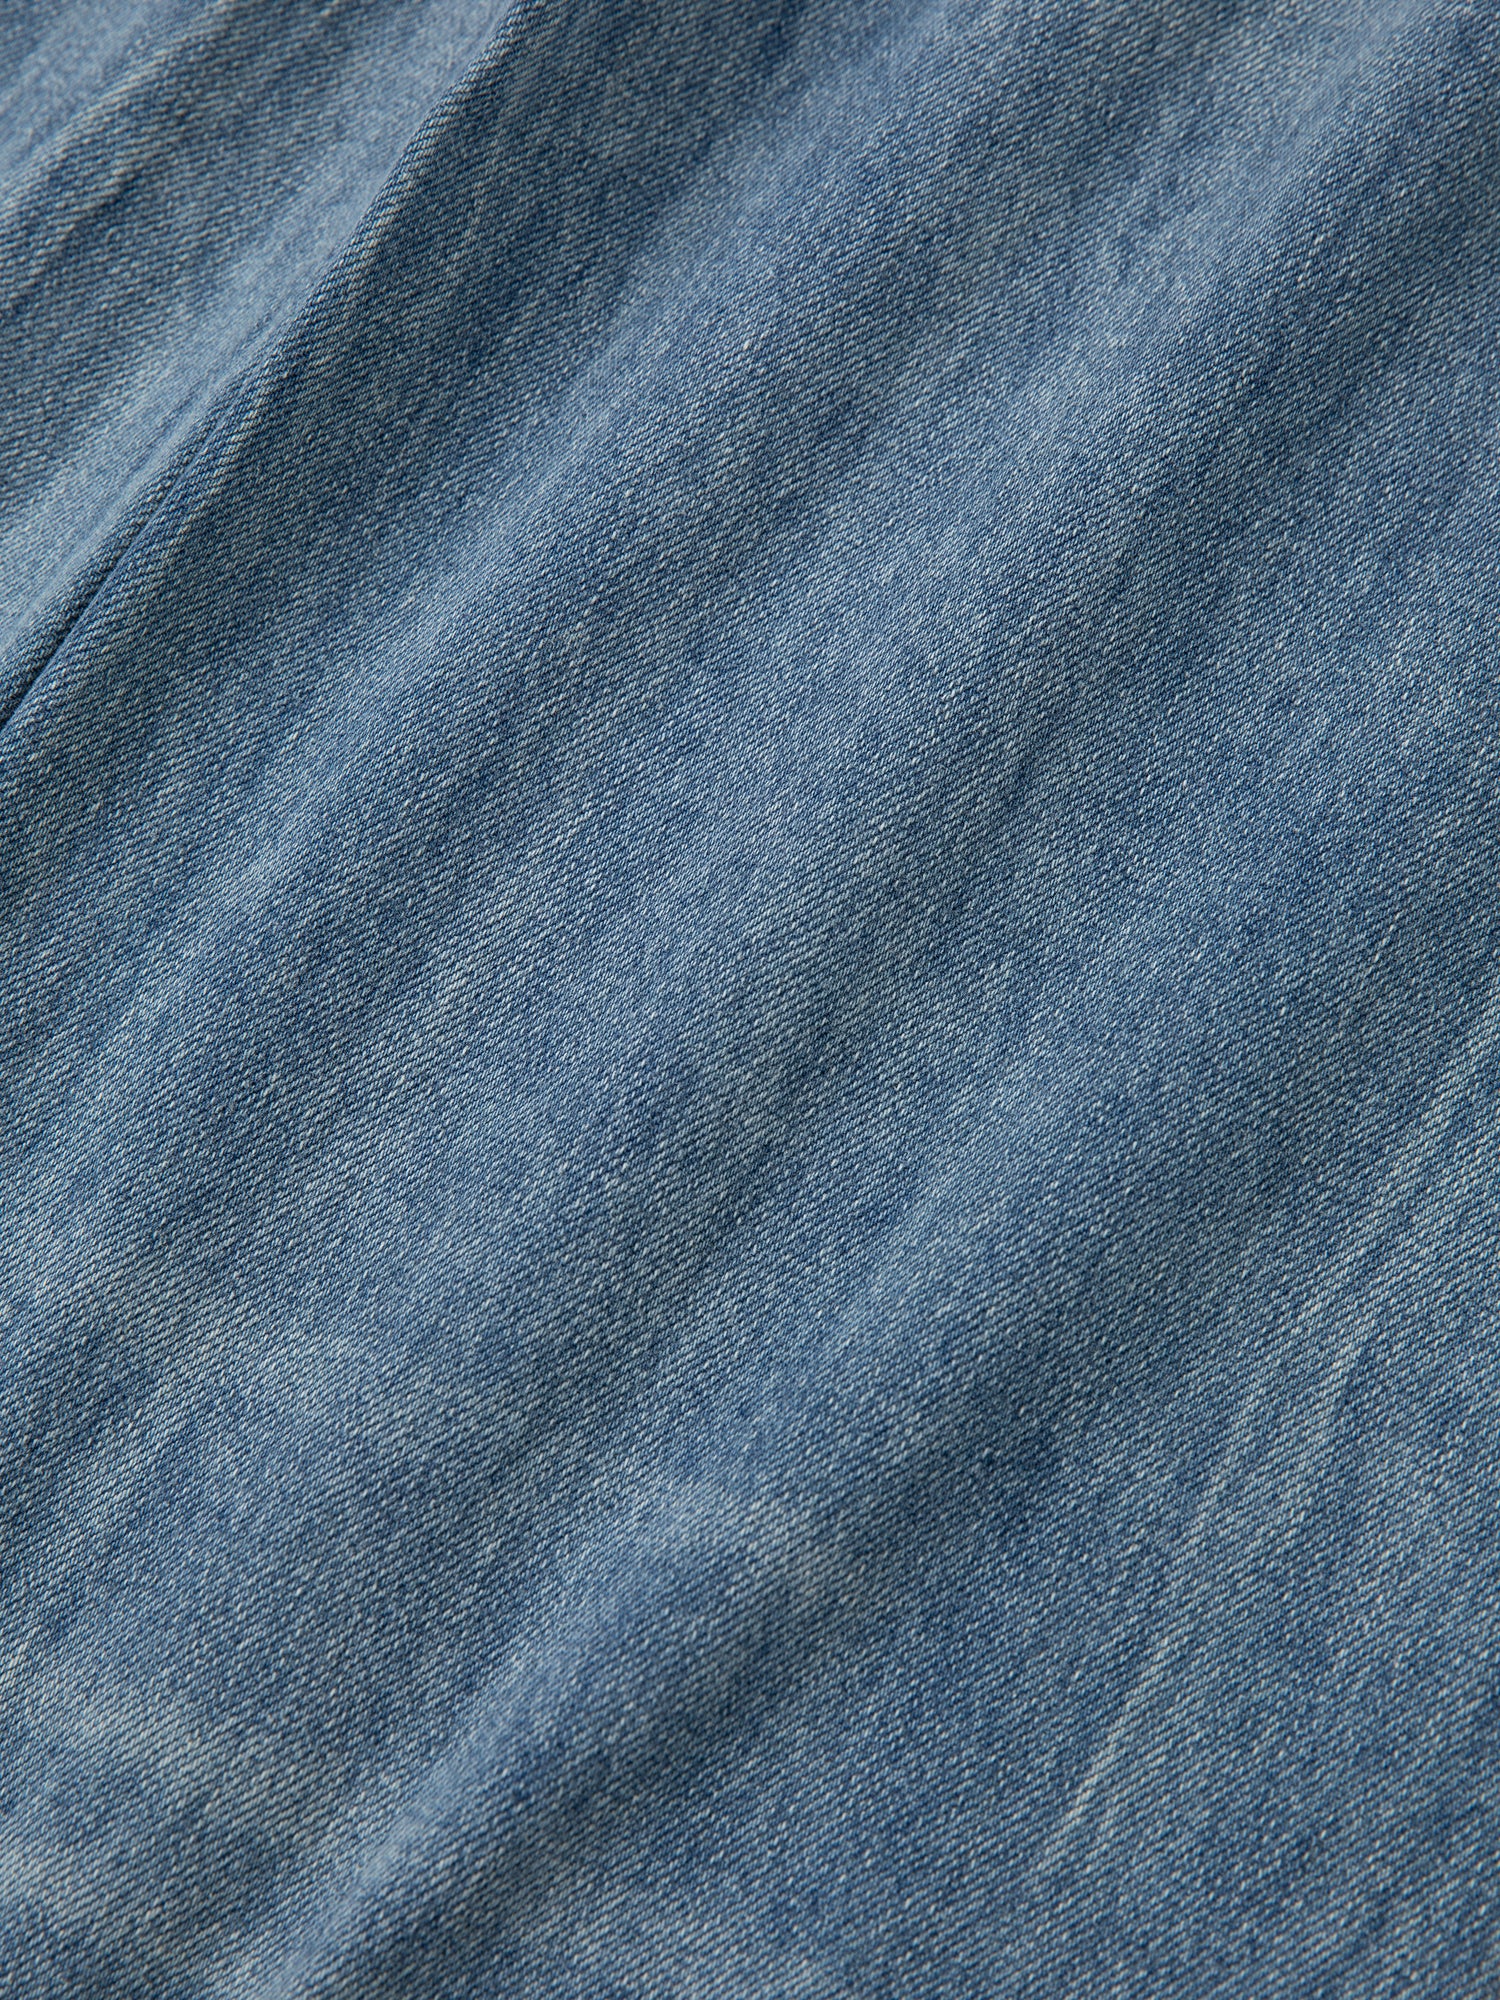 A close up of Found's Lacy Baggy Jeans in a vintage blue wash denim fabric.